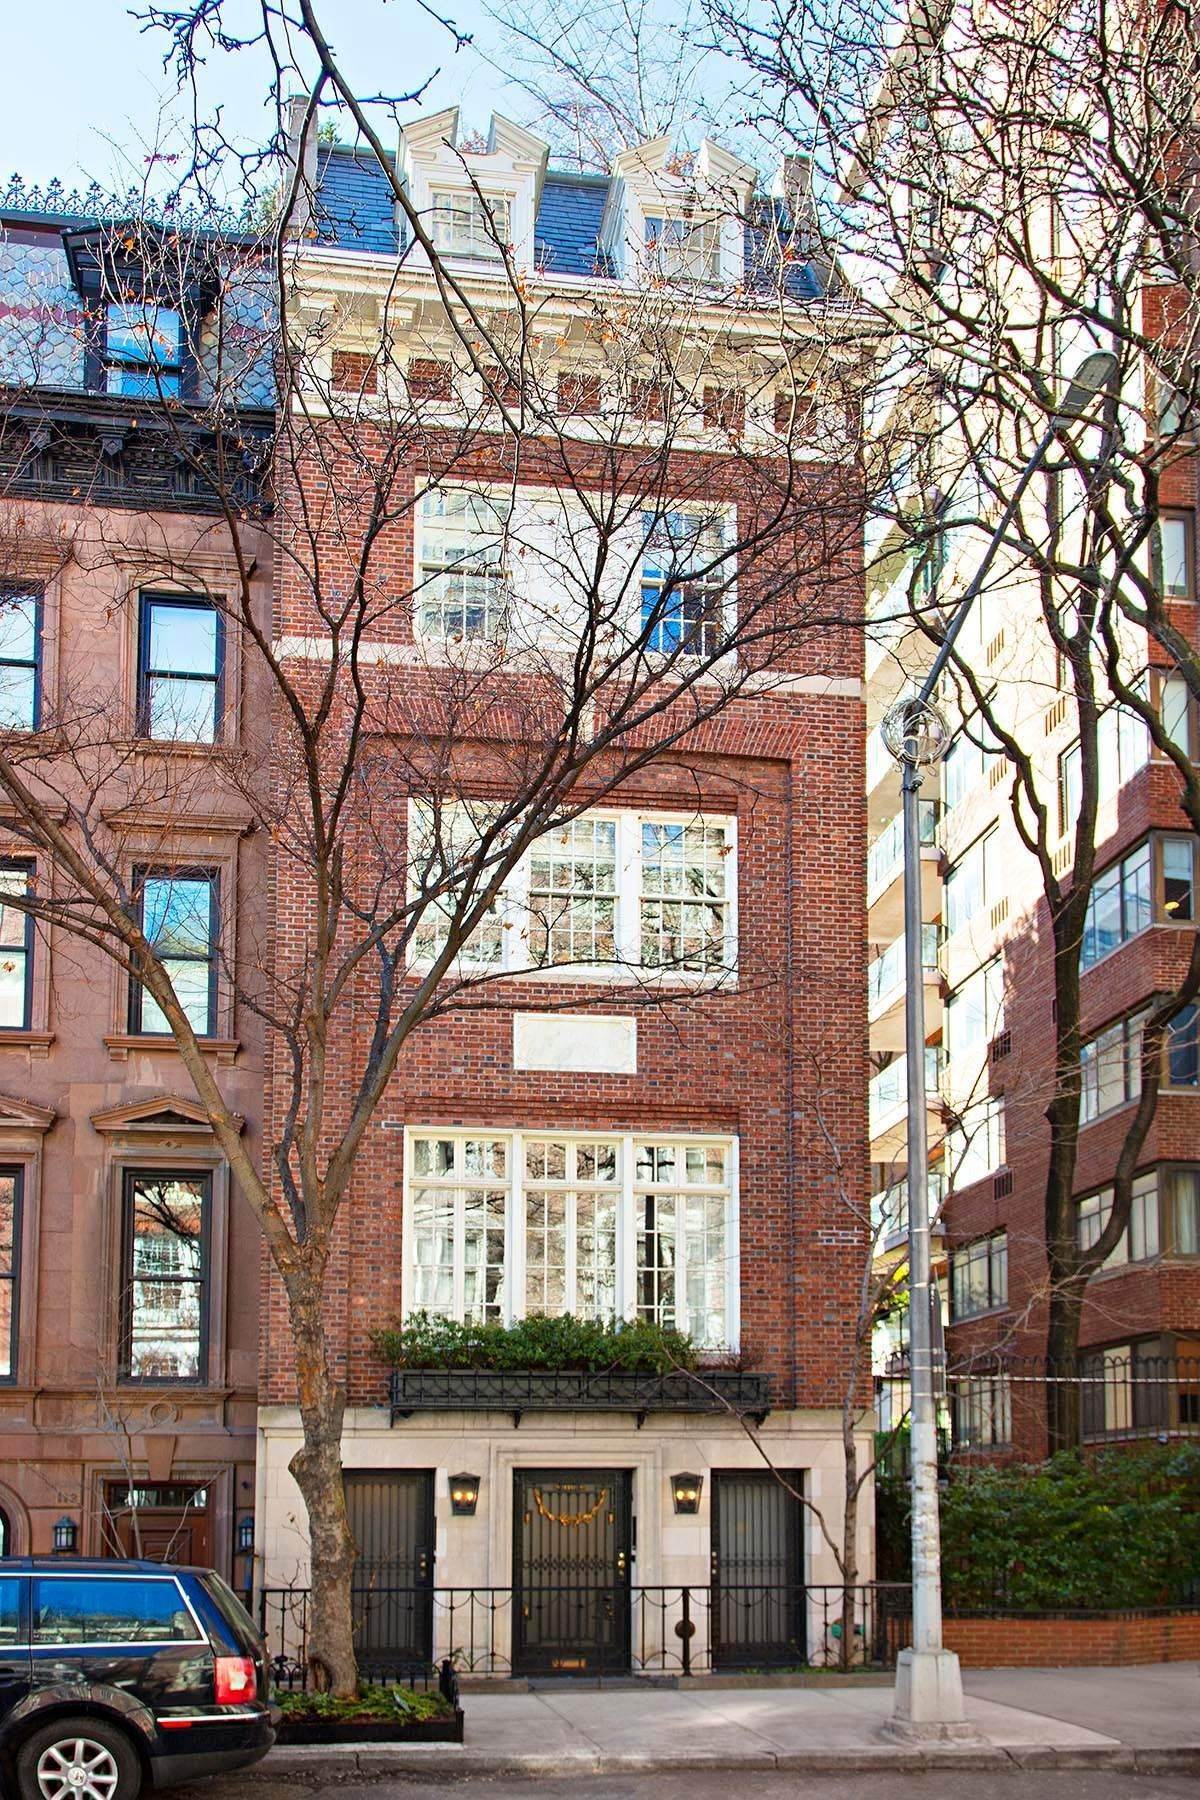 2. Townhouse at 110 East 70th Street New York, New York 10021 United States